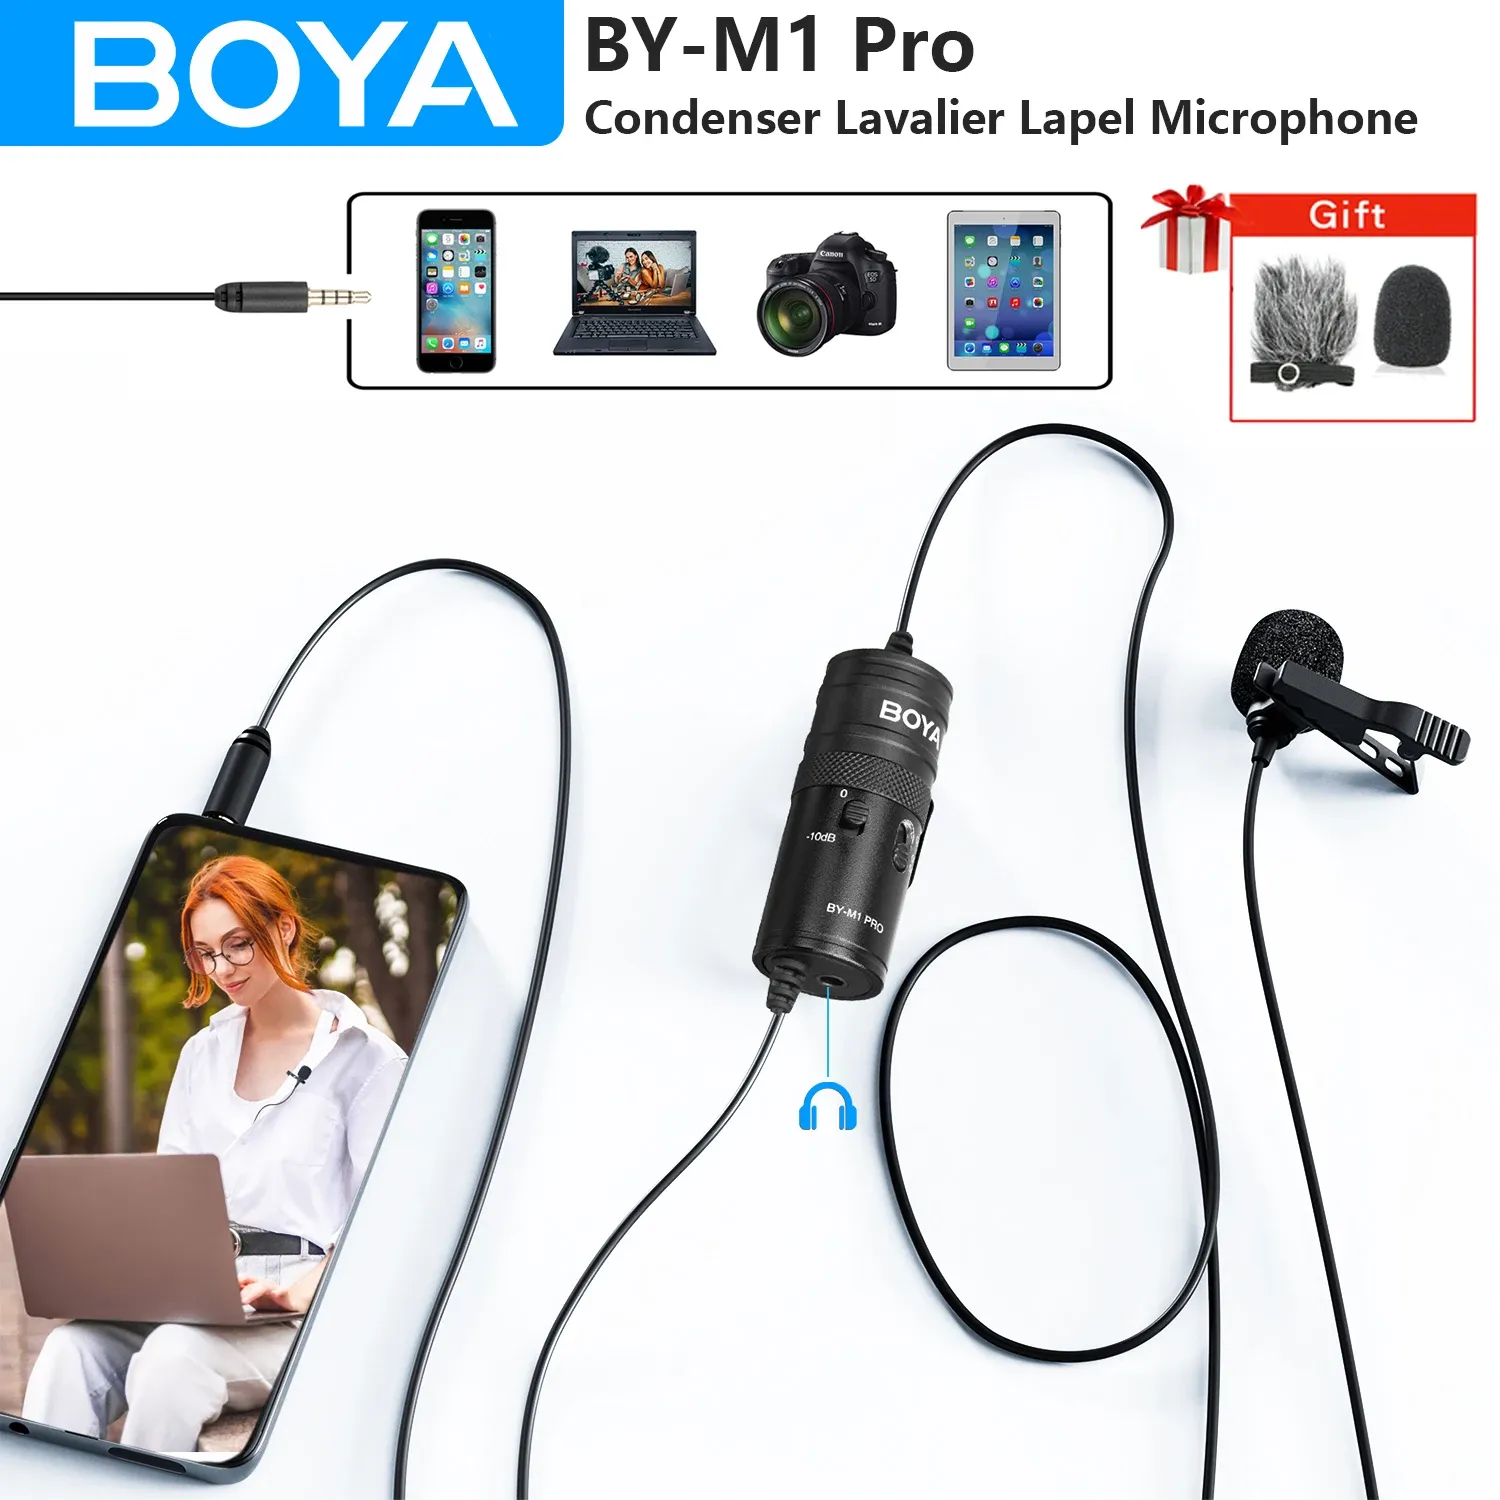 Tripods Boya Bym1 Pro Lavalier Lapel Microfono per iPhone Android DSLR CAMERA PC Laptop Computer Vlog Streaming YouTube Mic